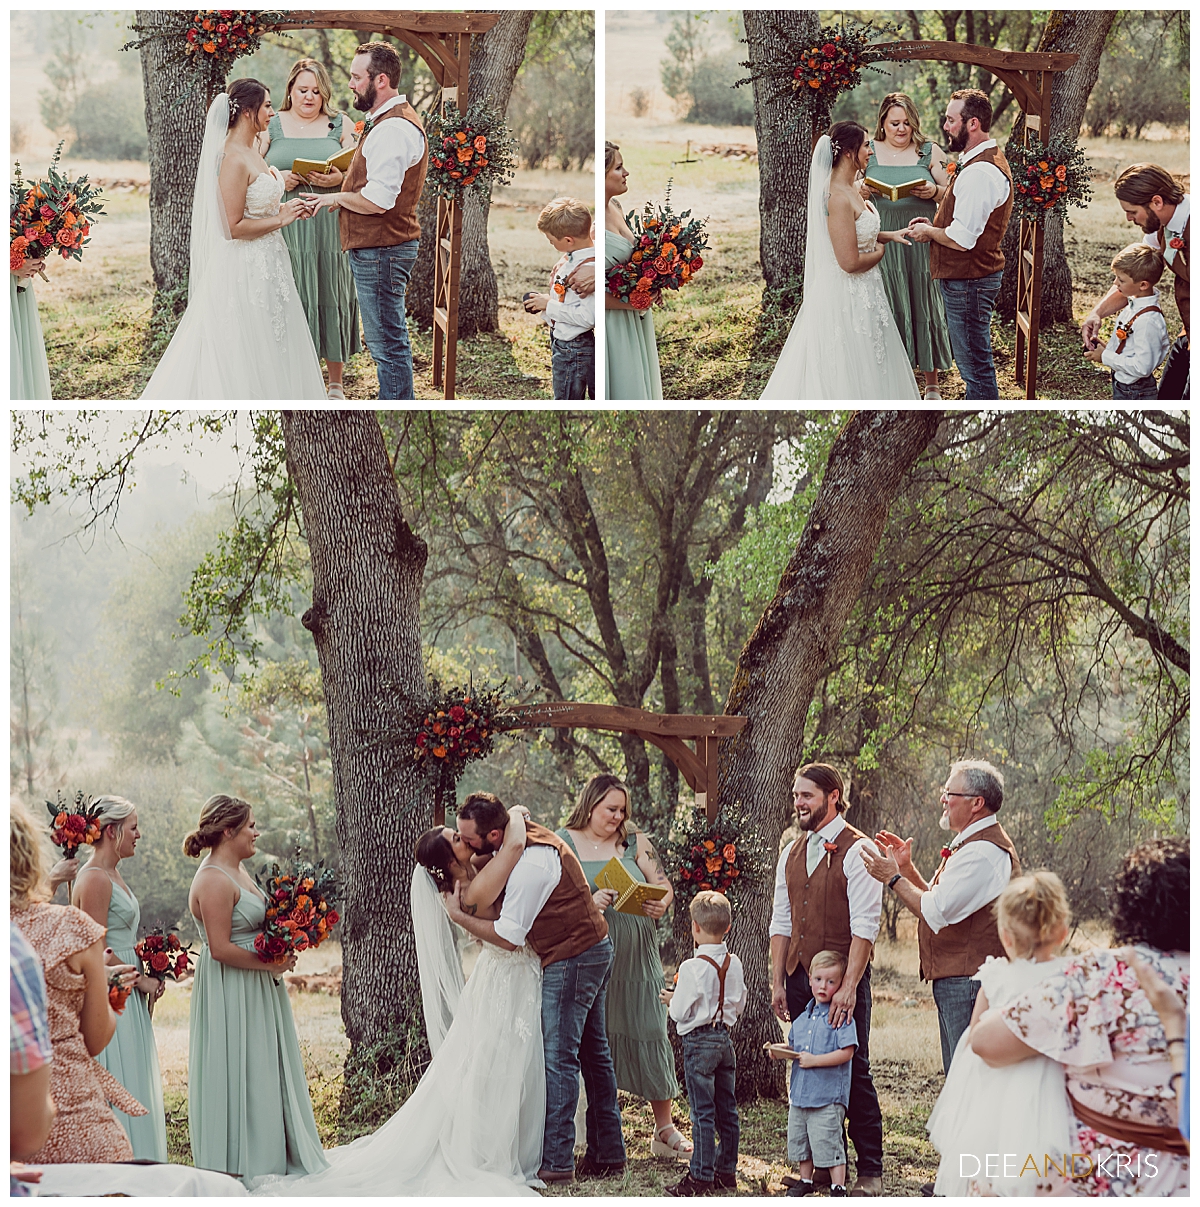 Three images of the ring exchange and first kiss.